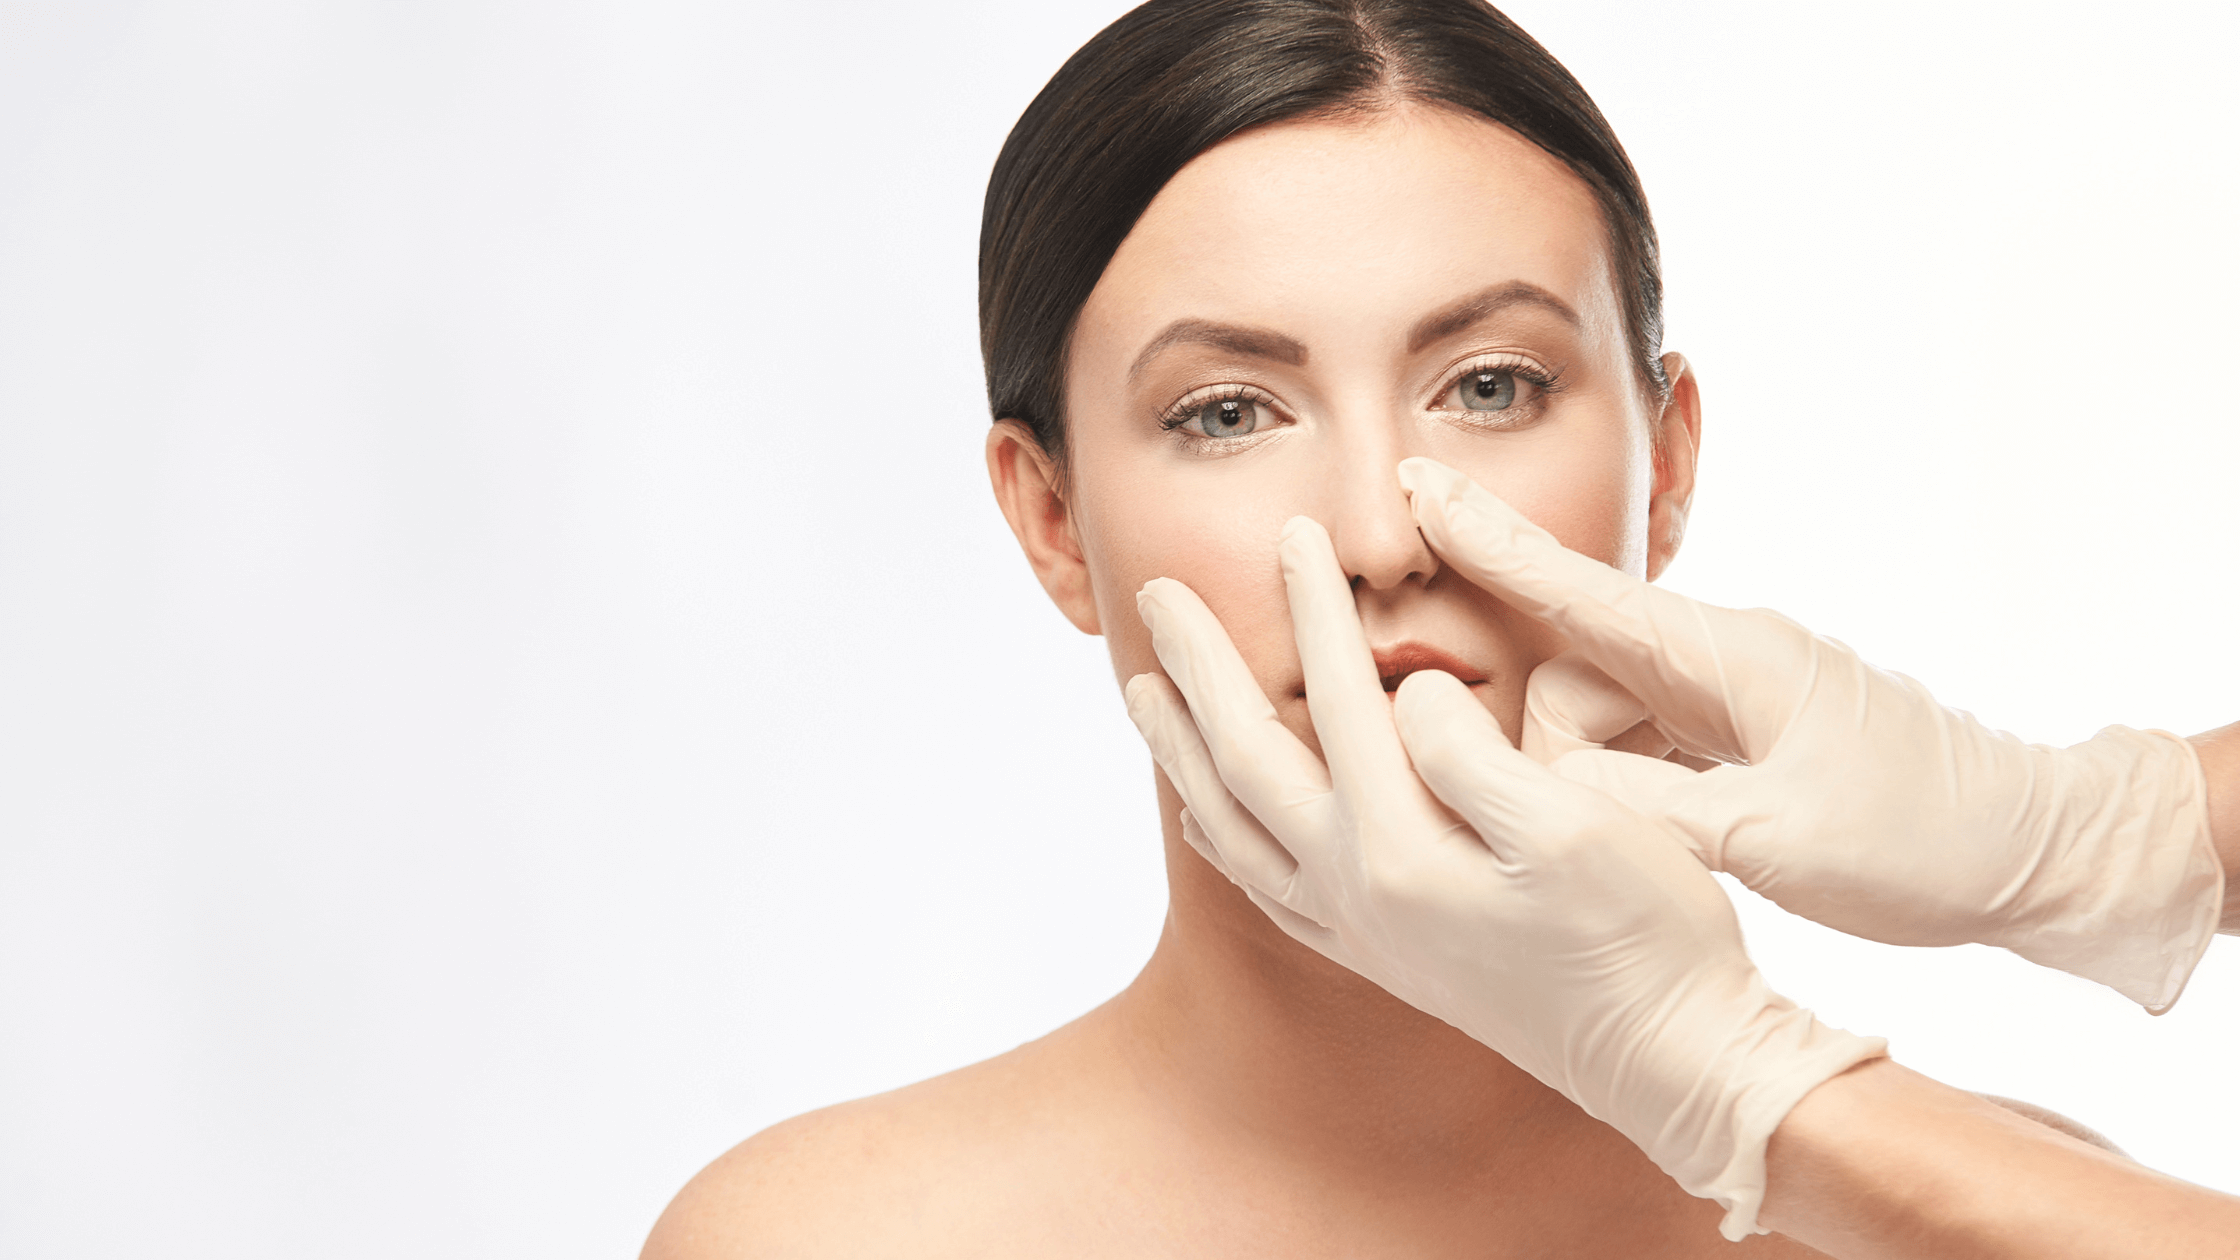 Rhinoplasty: The Benefits of Nose Job Surgery and What You Need to Know